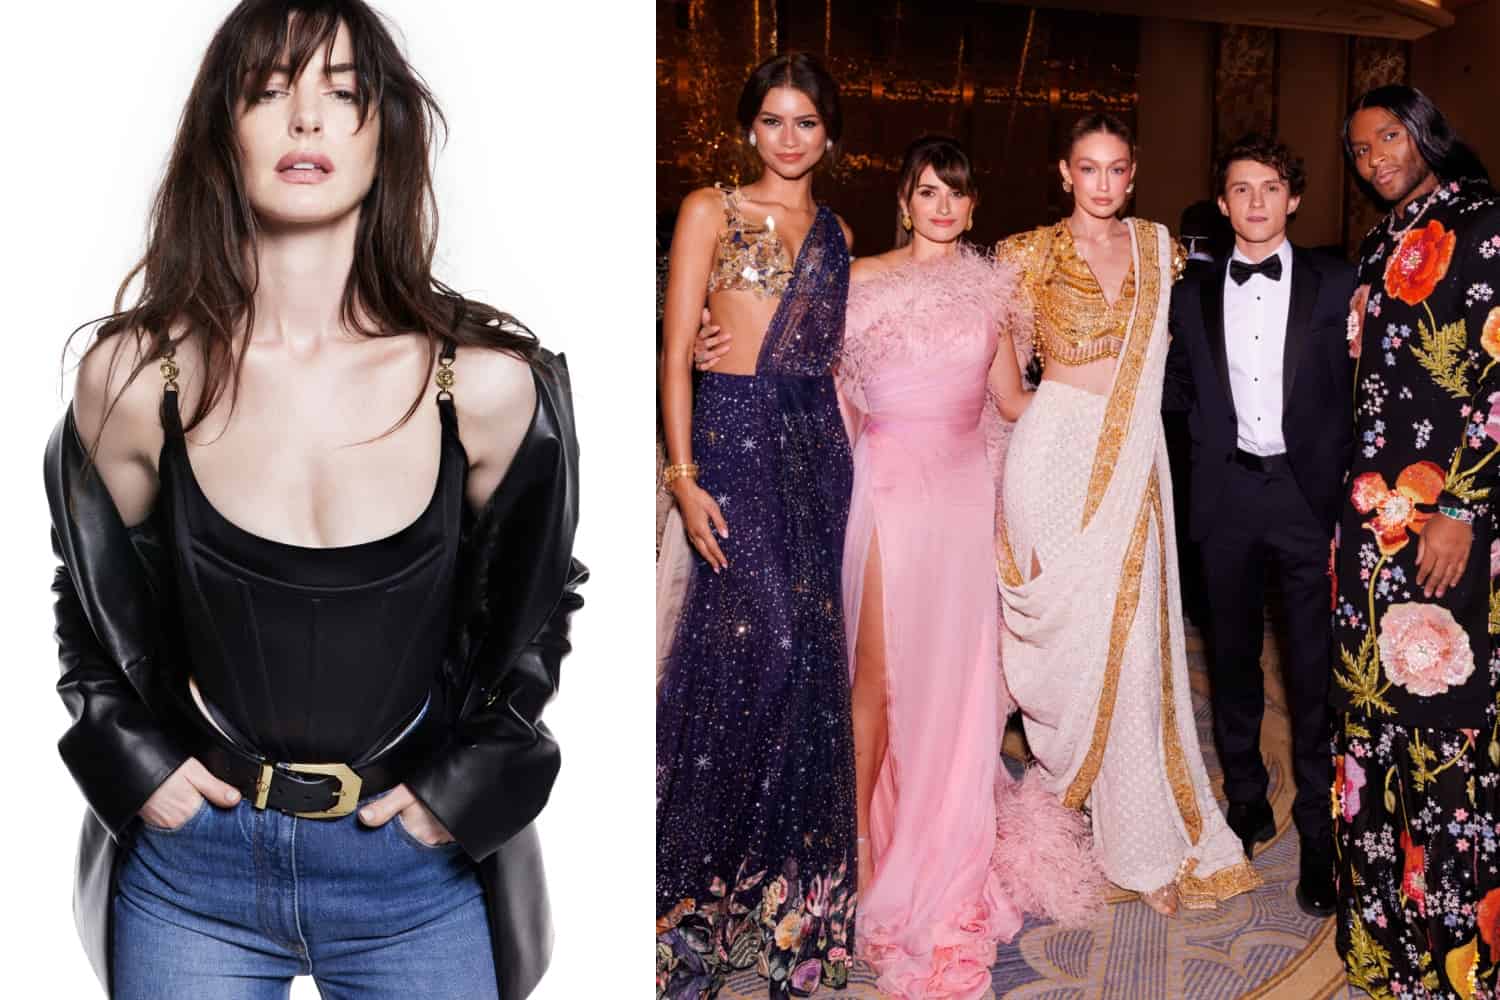 NMACC Opens In Mumbai, Anne Hathaway For Versace, CFDA’s New Members, Aeffe USA Names Next President, And More!